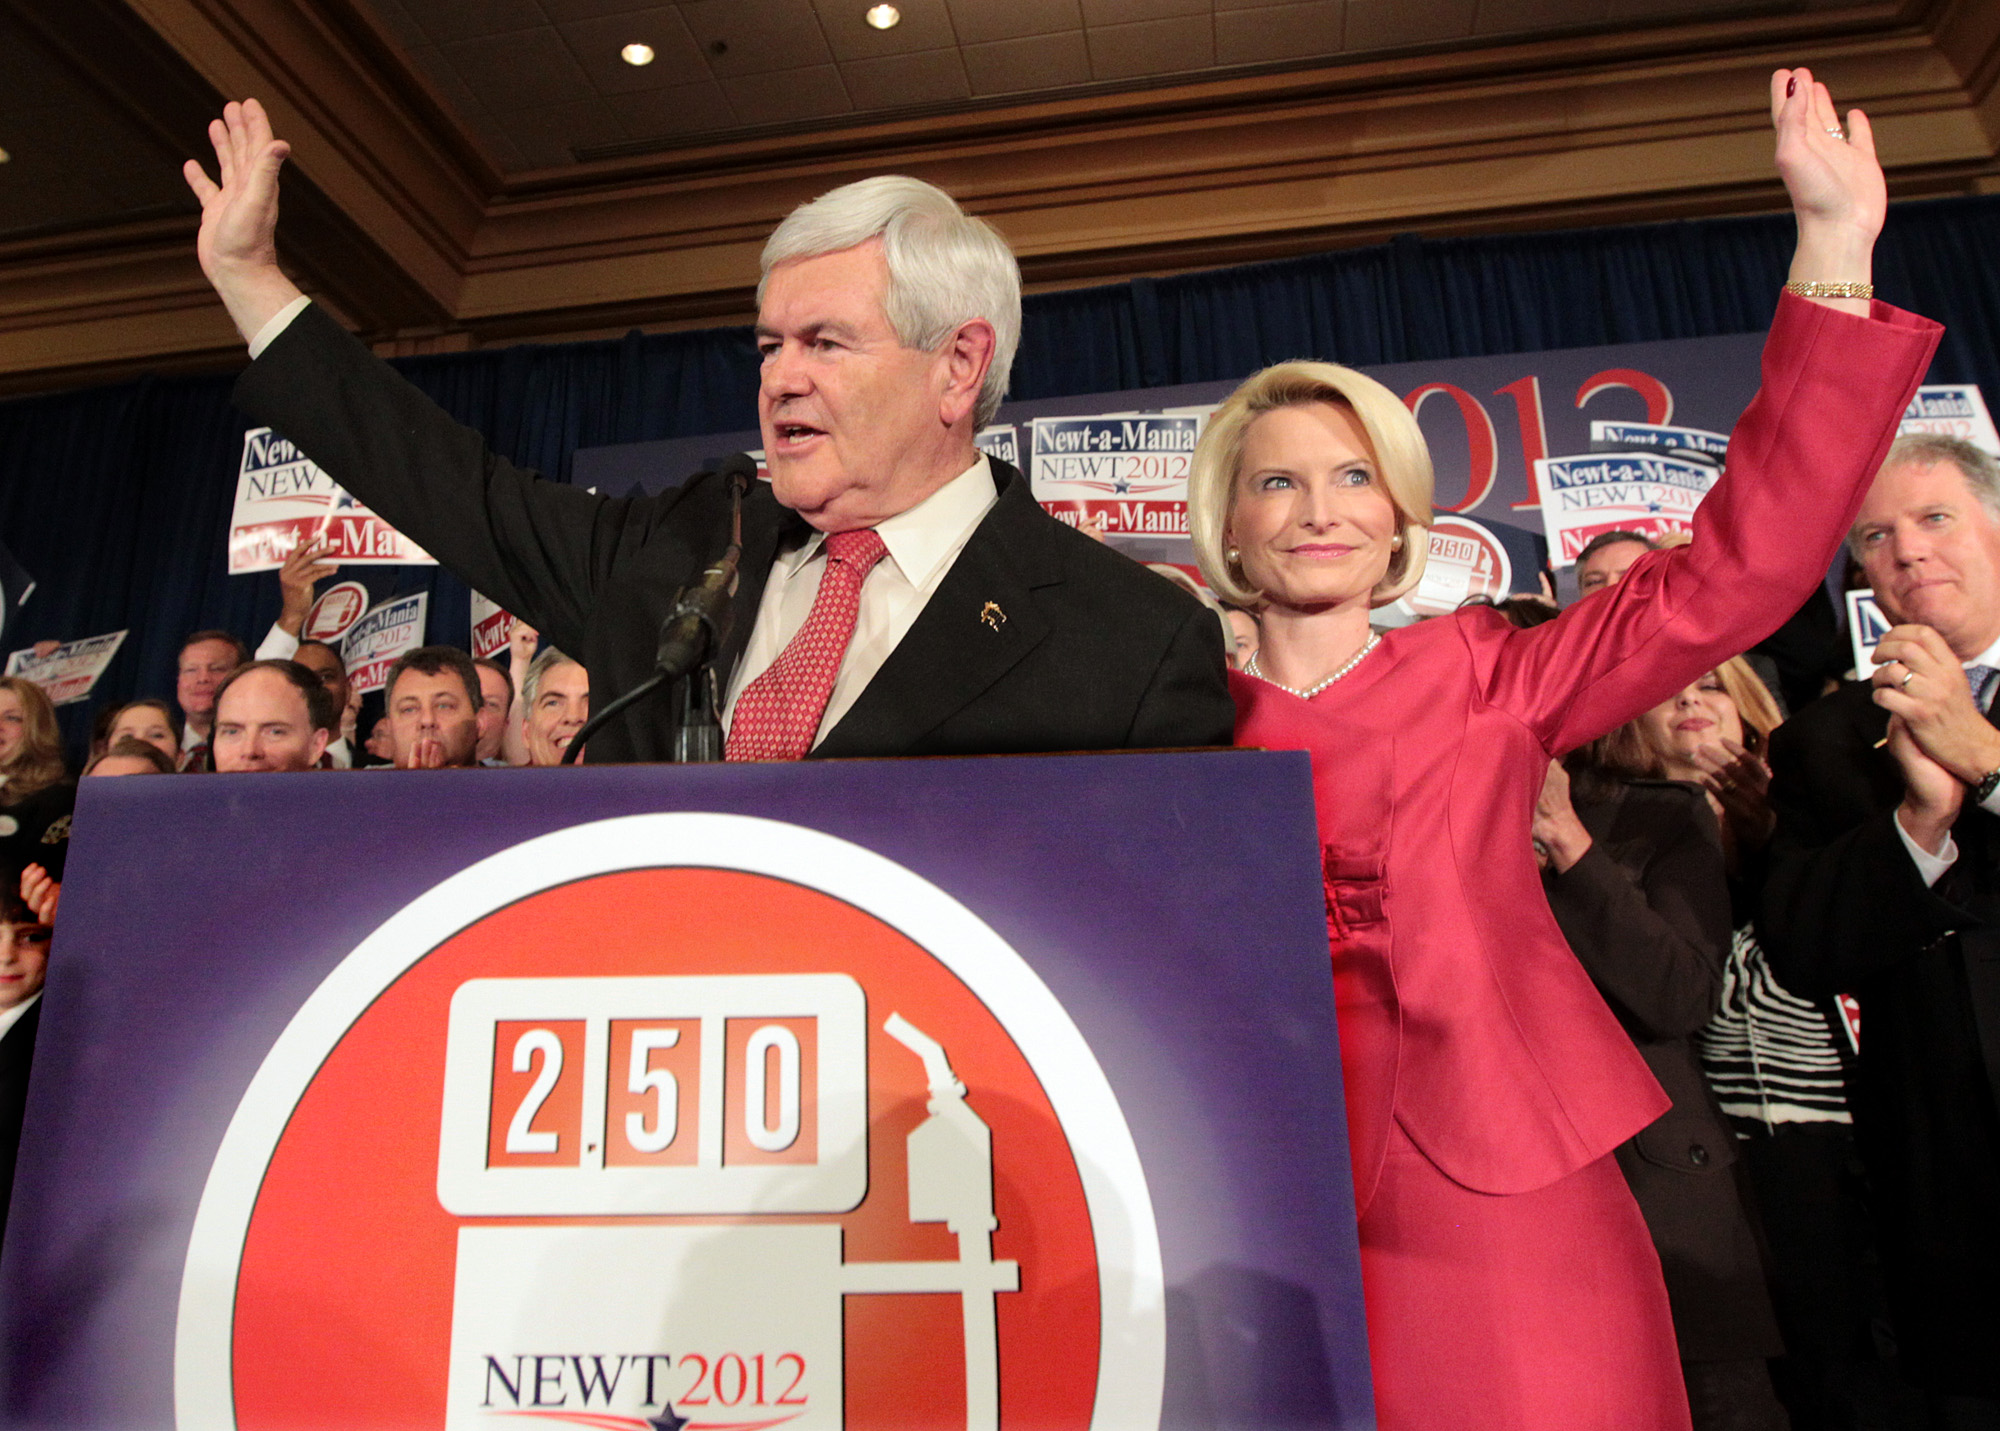 Republicans plan to kill Obama regulations the Newt Gingrich way